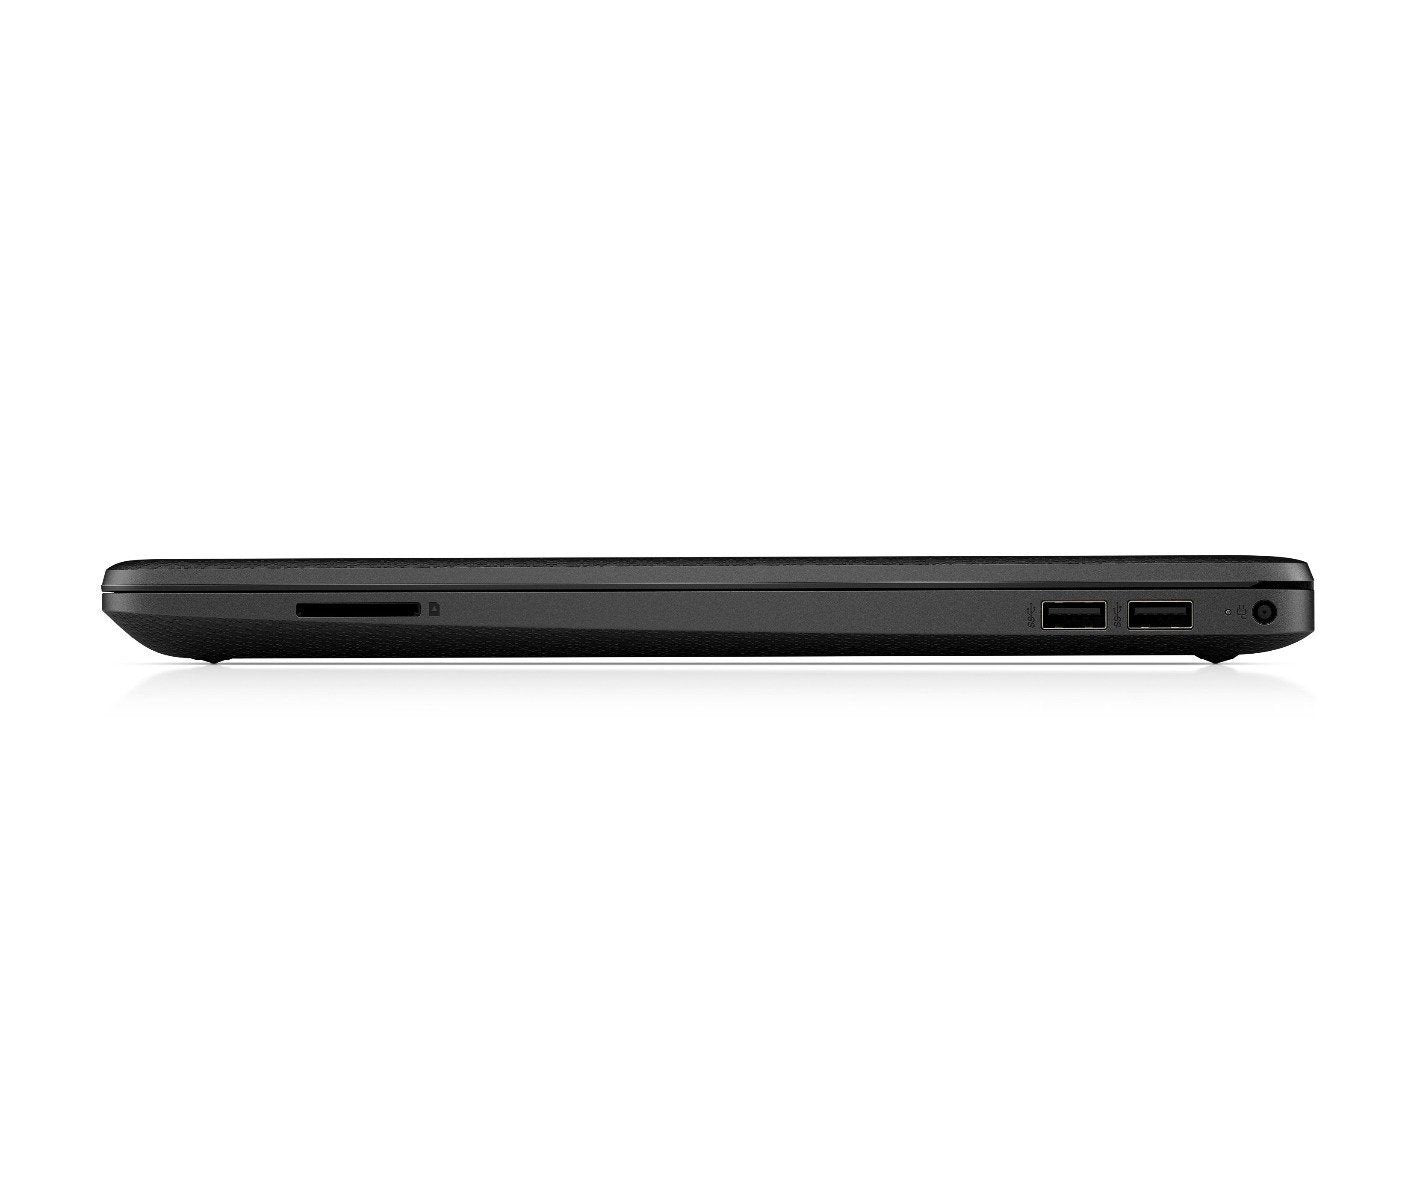 HP 15s Core i5 11th Gen - (8 GB/1 TB HDD/Windows 10 Home/2 GB Graphics) 15s-du3060TX Thin and Light Laptop  (15.6 inch, Jet Black, 1.77 kg, With MS Office)